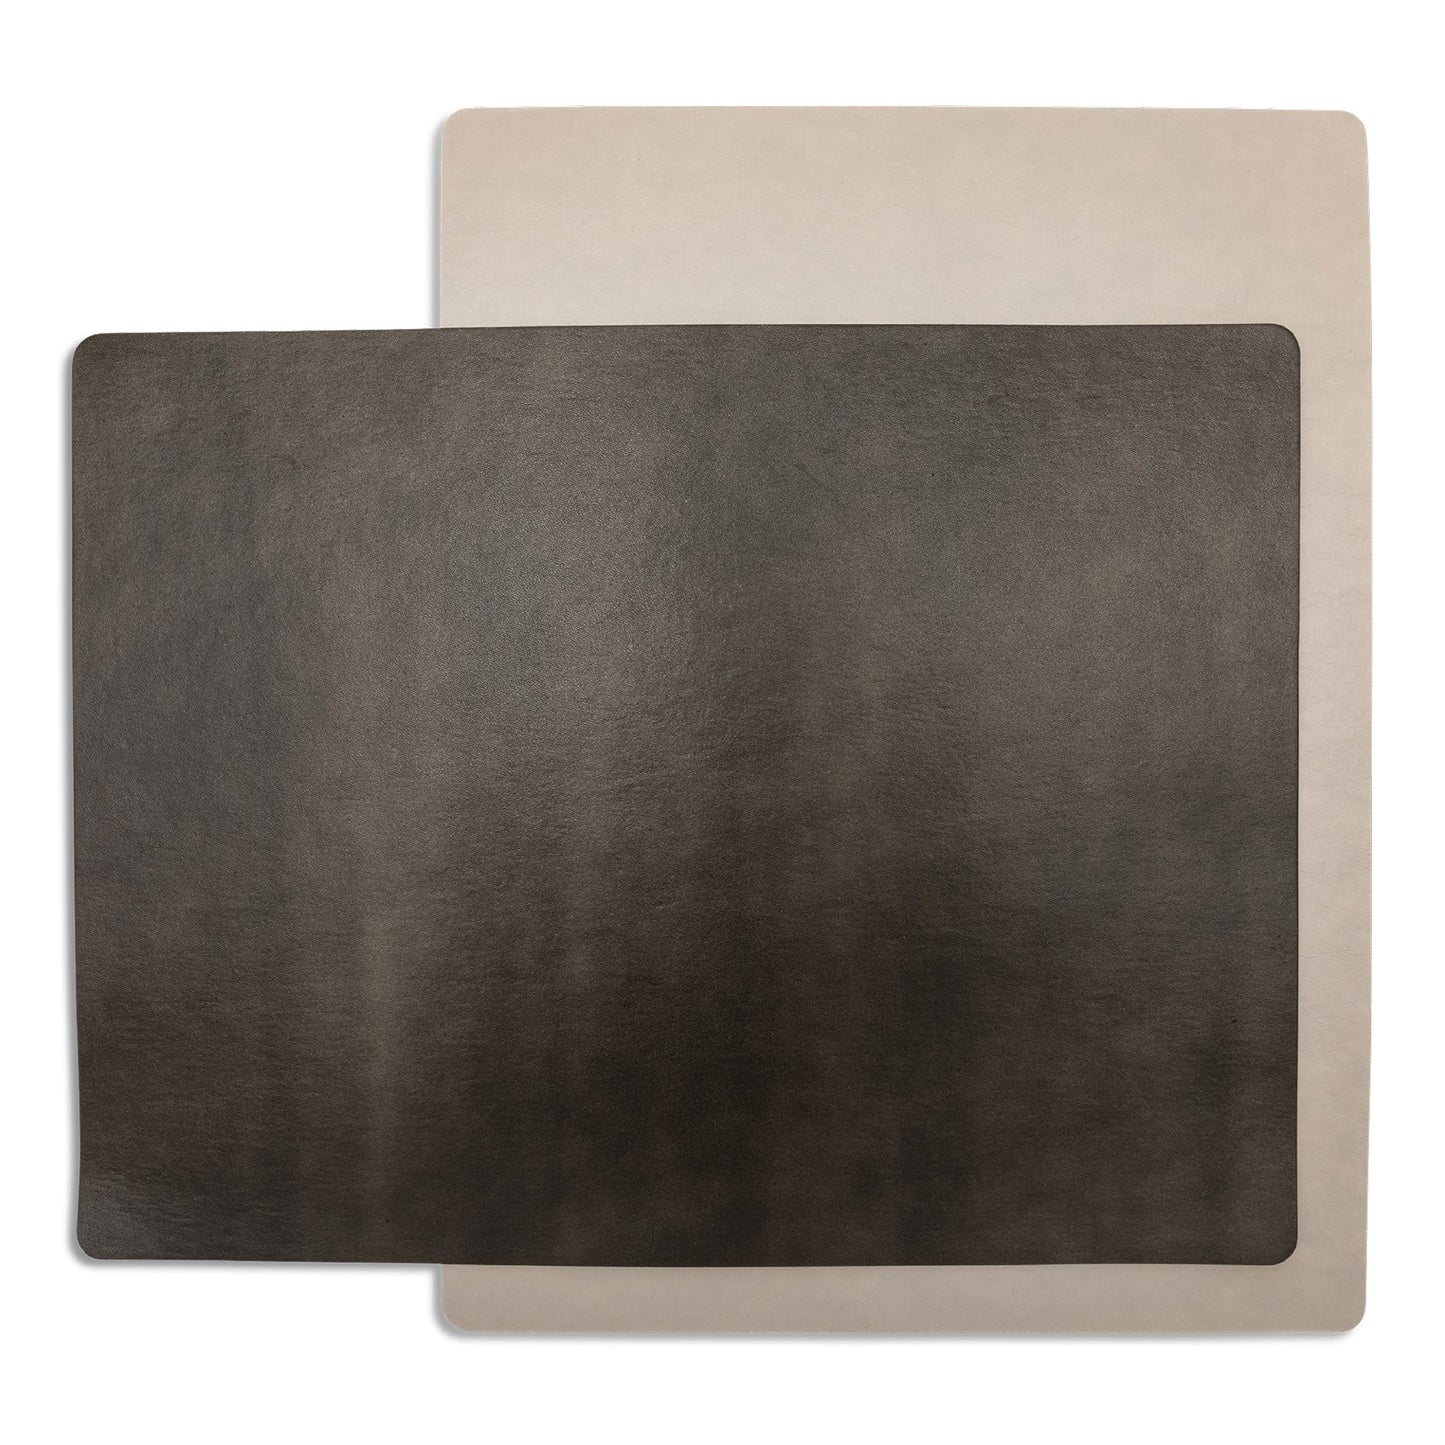 Two rectangular washable paper placemats are stacked one on top of the other. The one in the foreground is chocolate brown and the one at rear is beige.